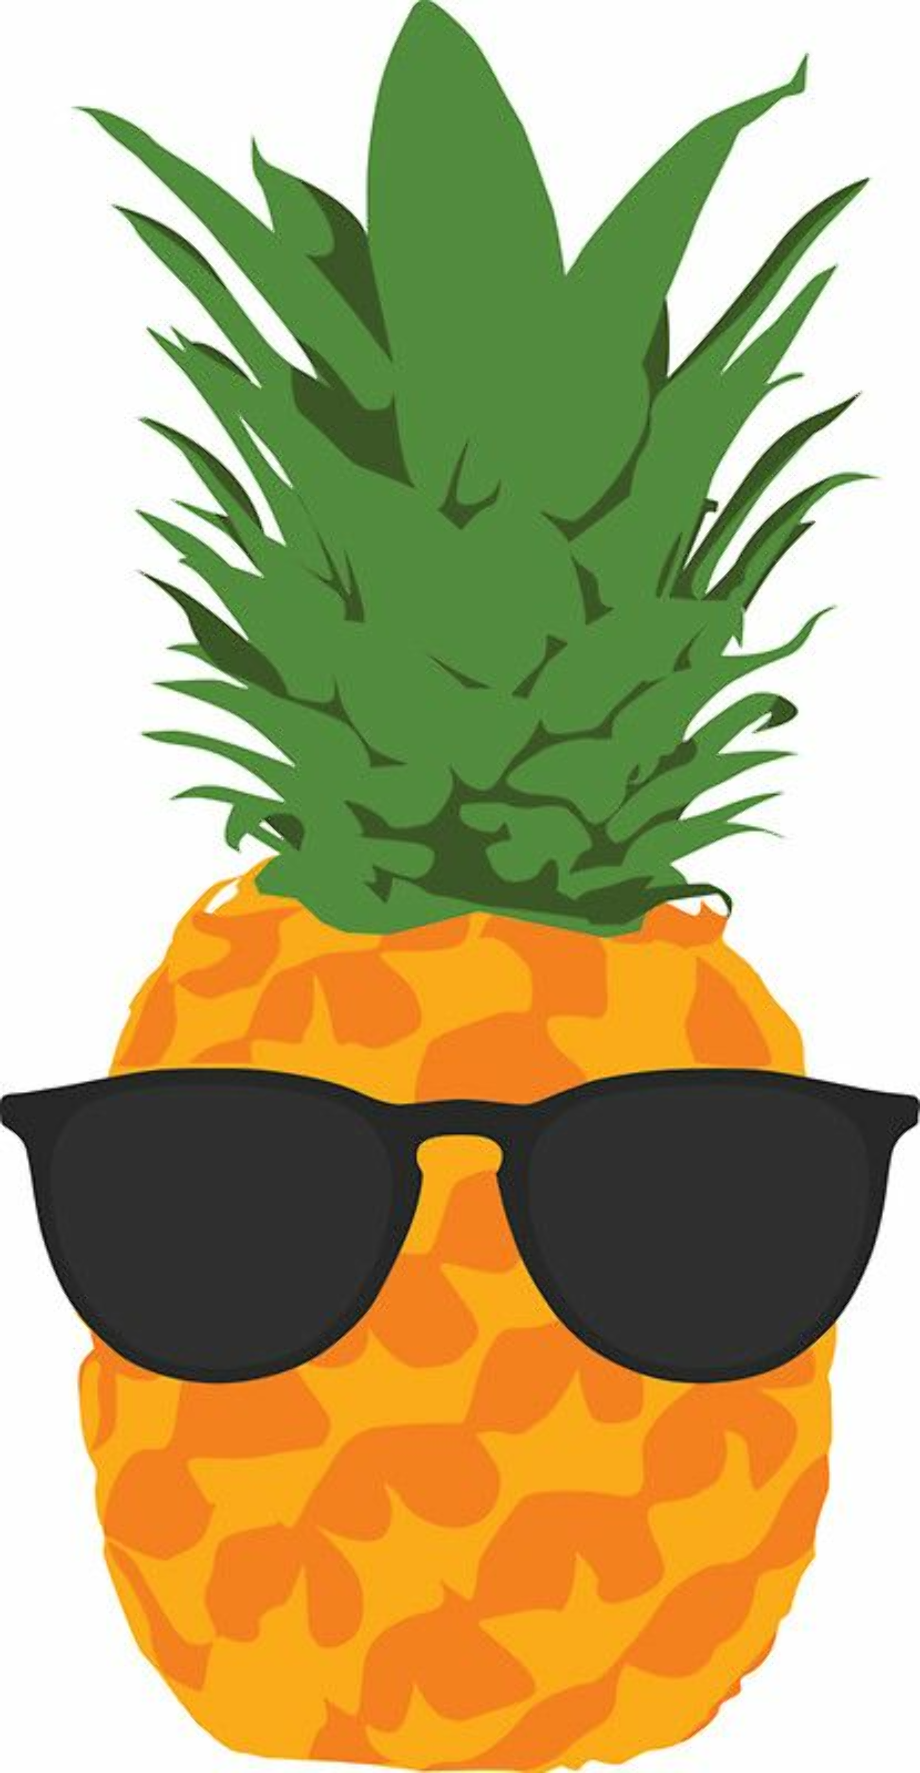 Download High Quality pineapple clip art cool Transparent PNG Images